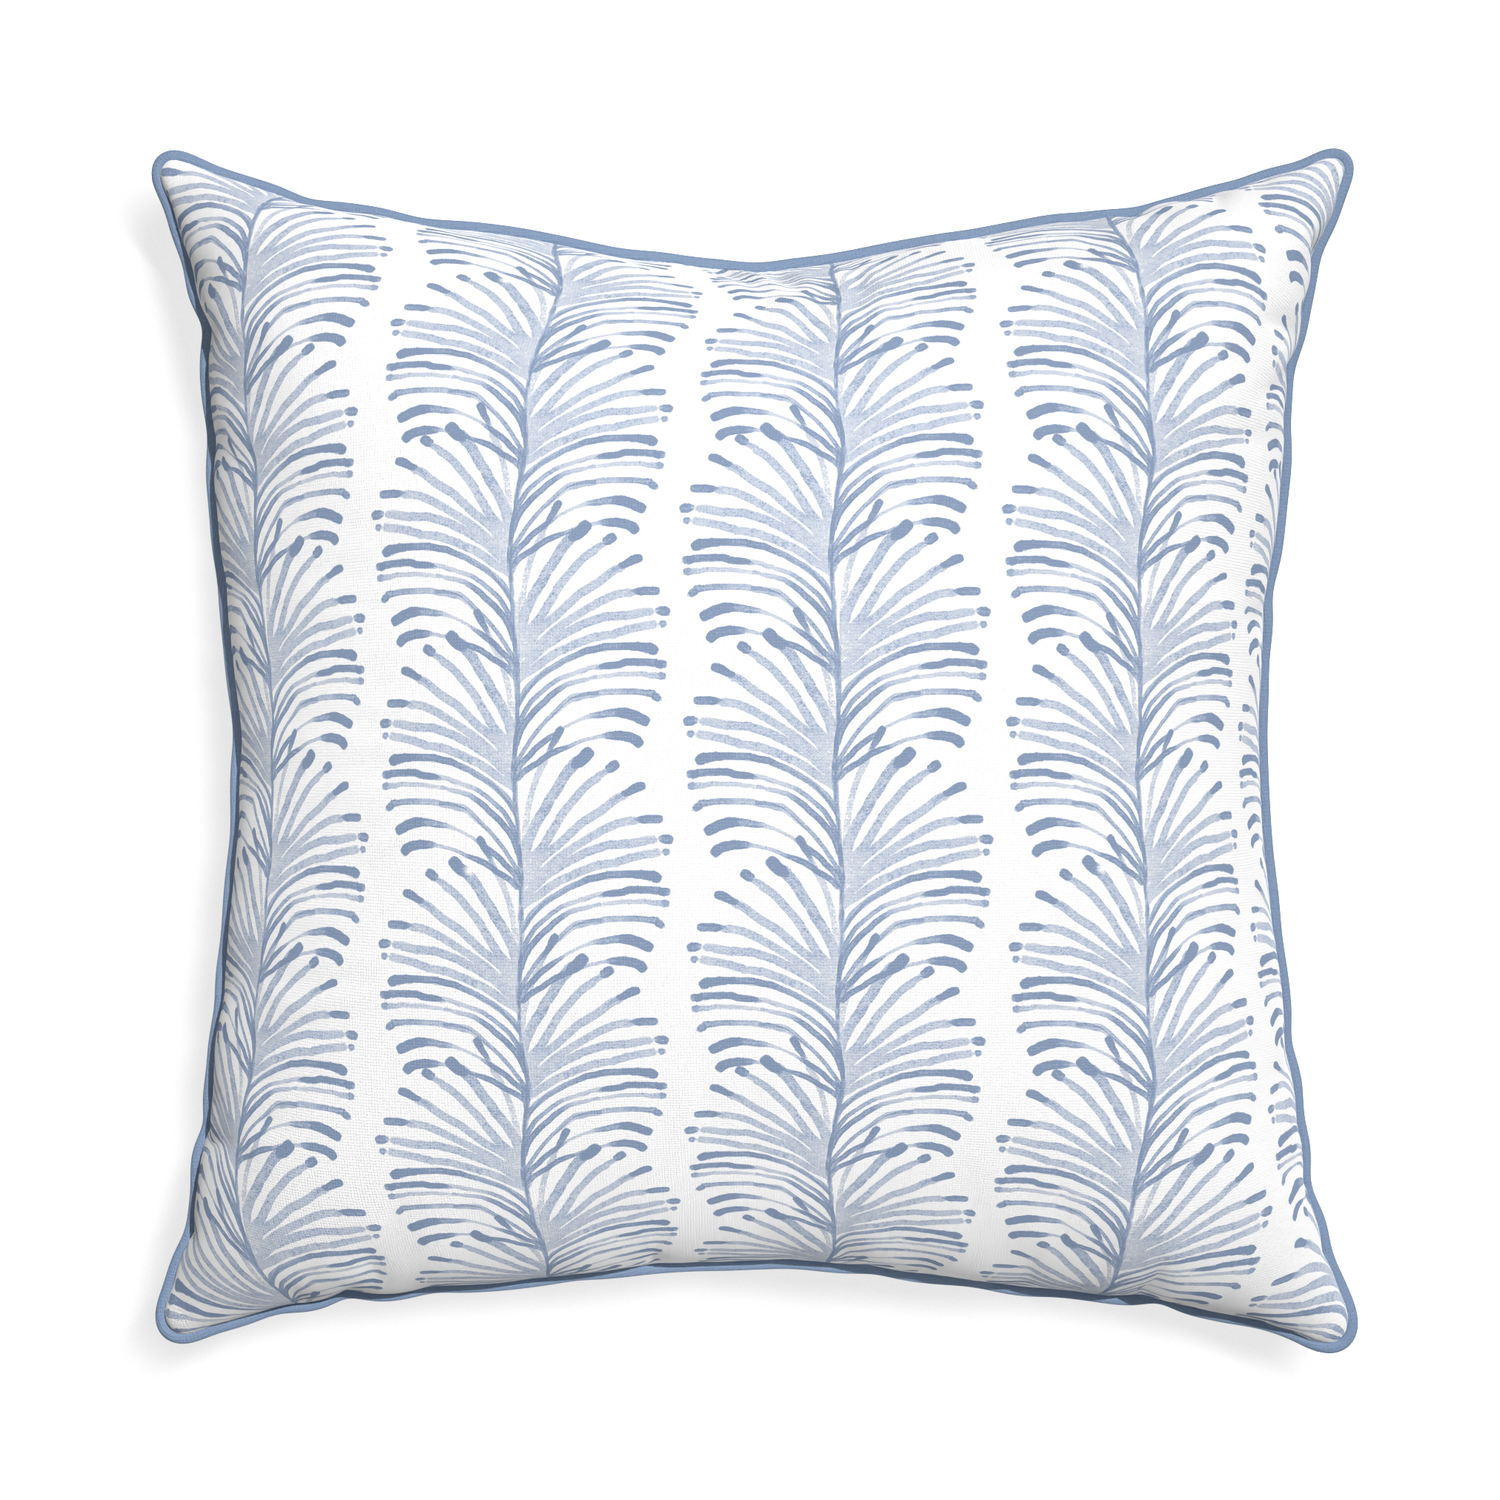 Euro-sham emma sky custom pillow with sky piping on white background